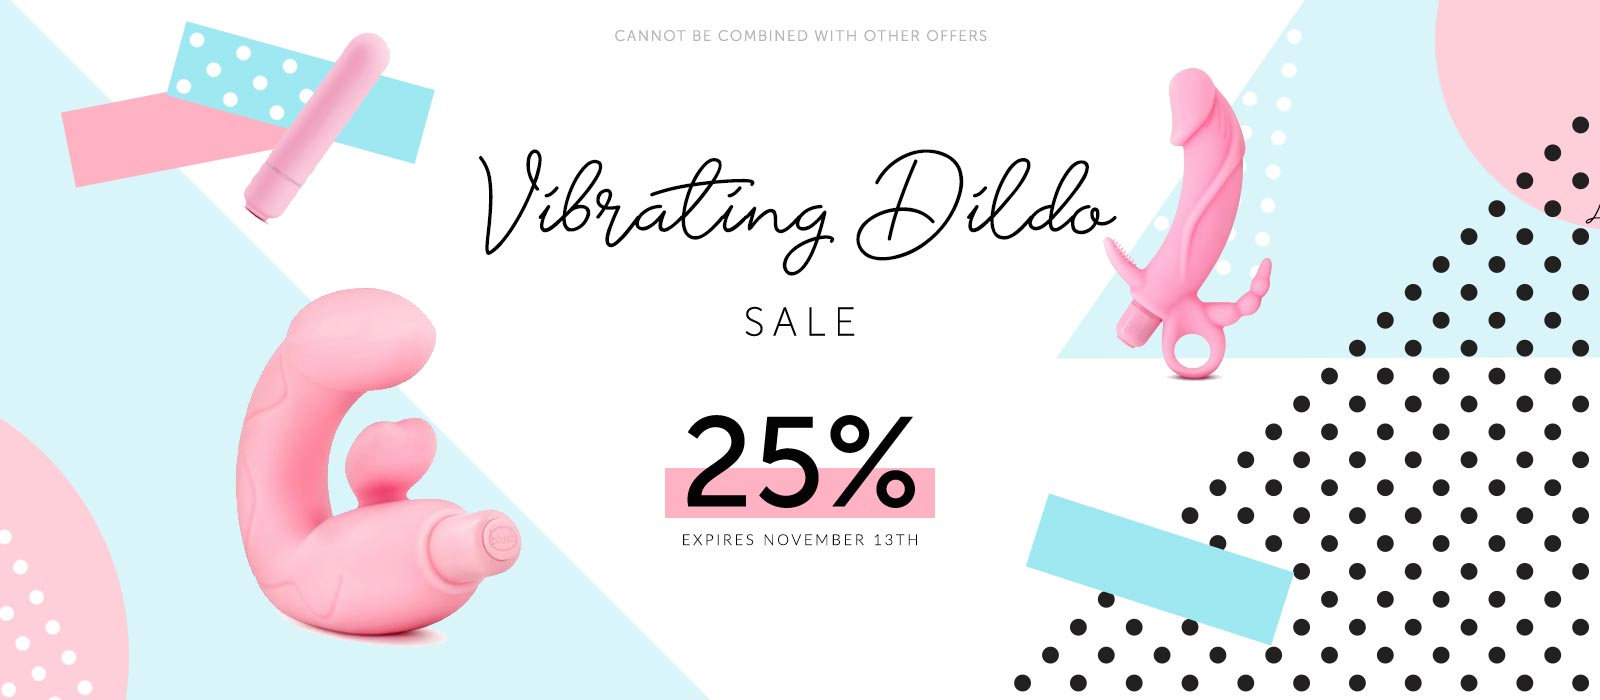 25% off all our vibrating dildos